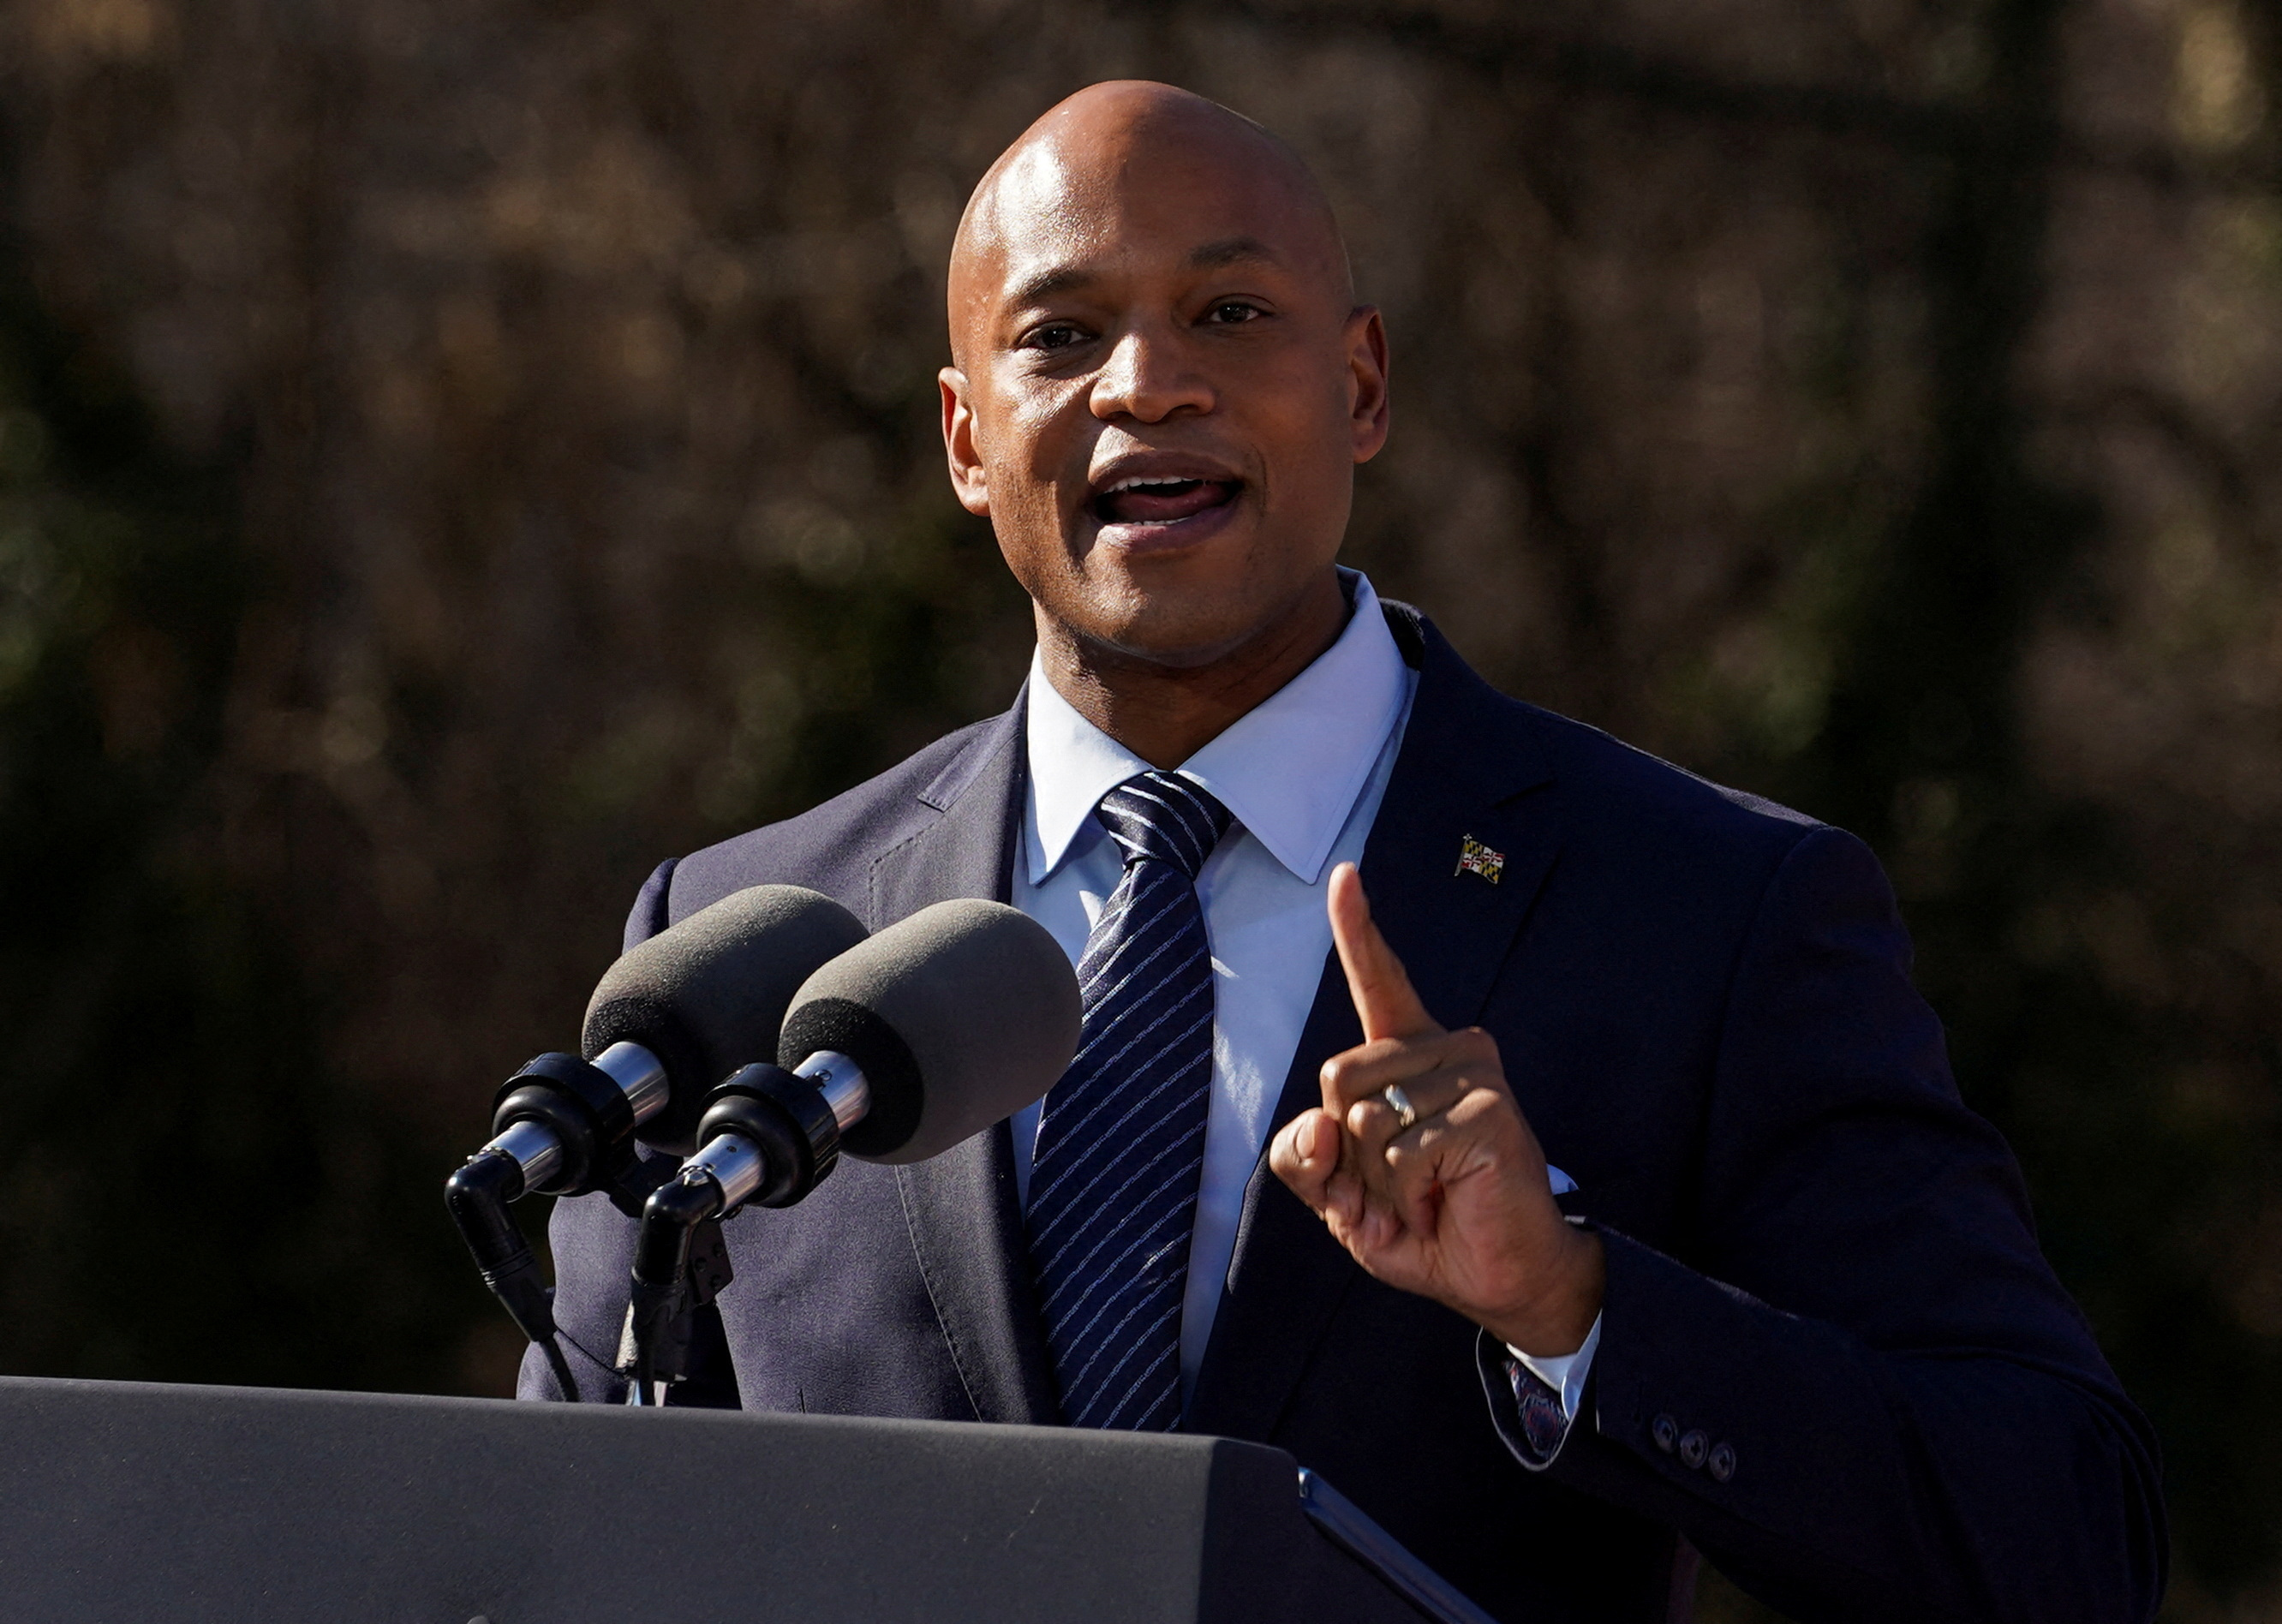 Maryland Governor Wes Moore speaks at an event in Baltimore